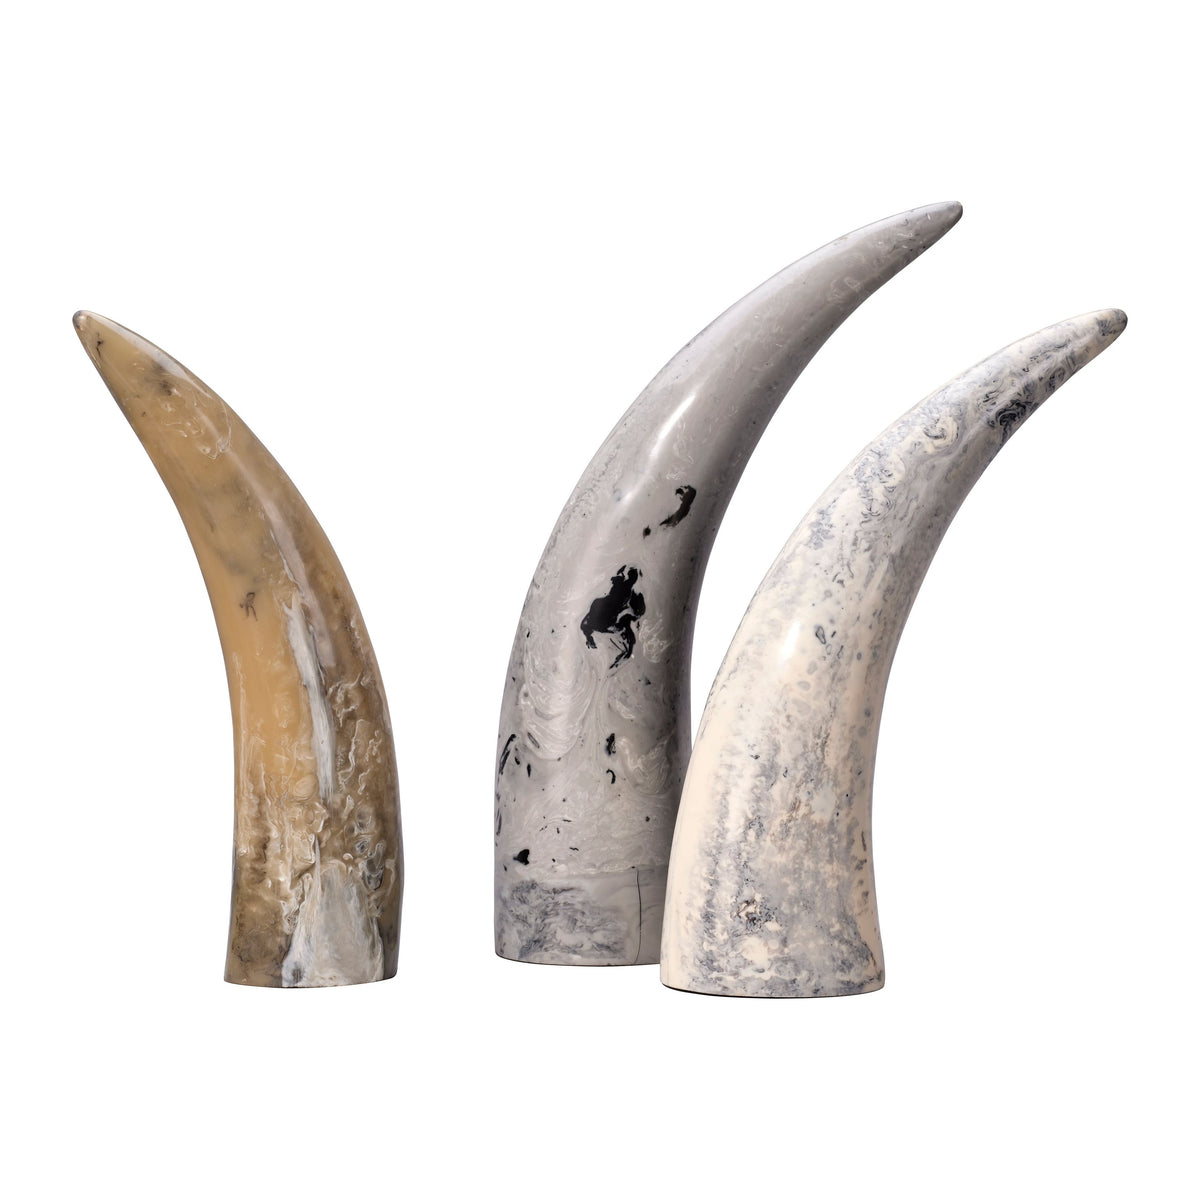 Jamie Young Company - 7VARI-OBGR -  Variegated Horn Decorative Objects -  - Swirled Cream, Black and Grey Resin